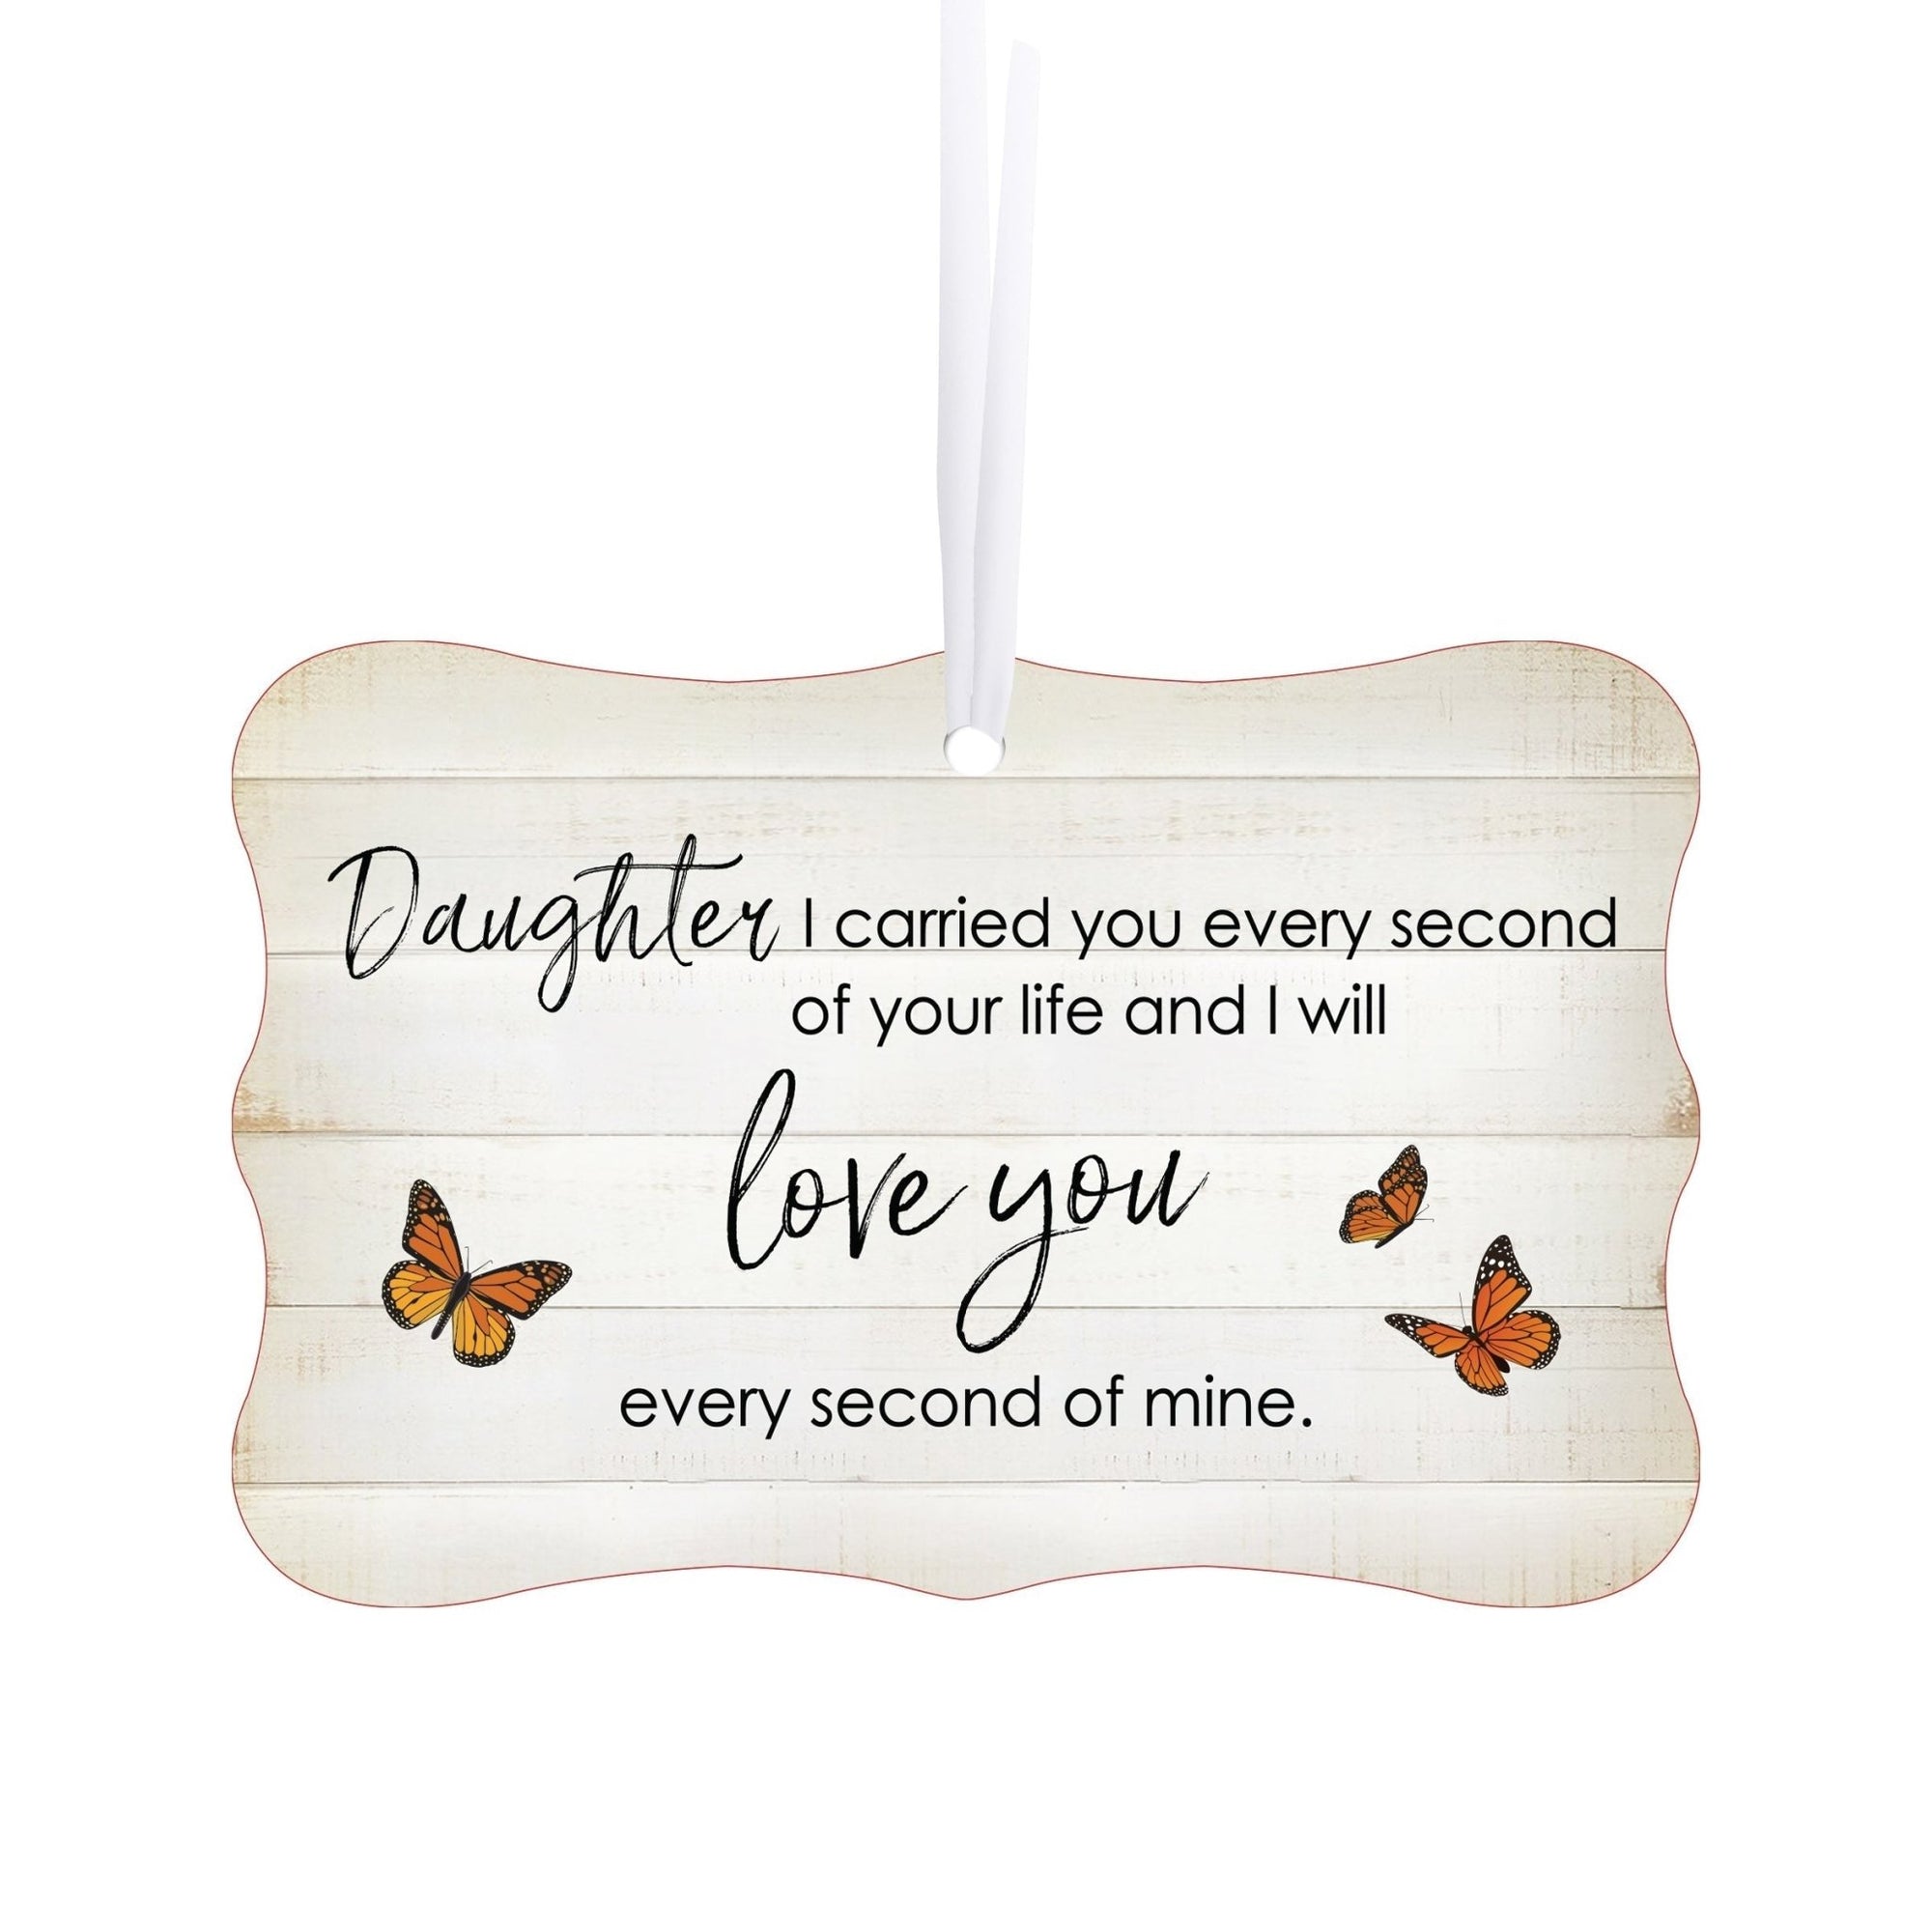 Lifesong Milestones Hanging Memorial White Scalloped Ornament for Loss of Loved One: A beautiful tribute with memorial decorations.